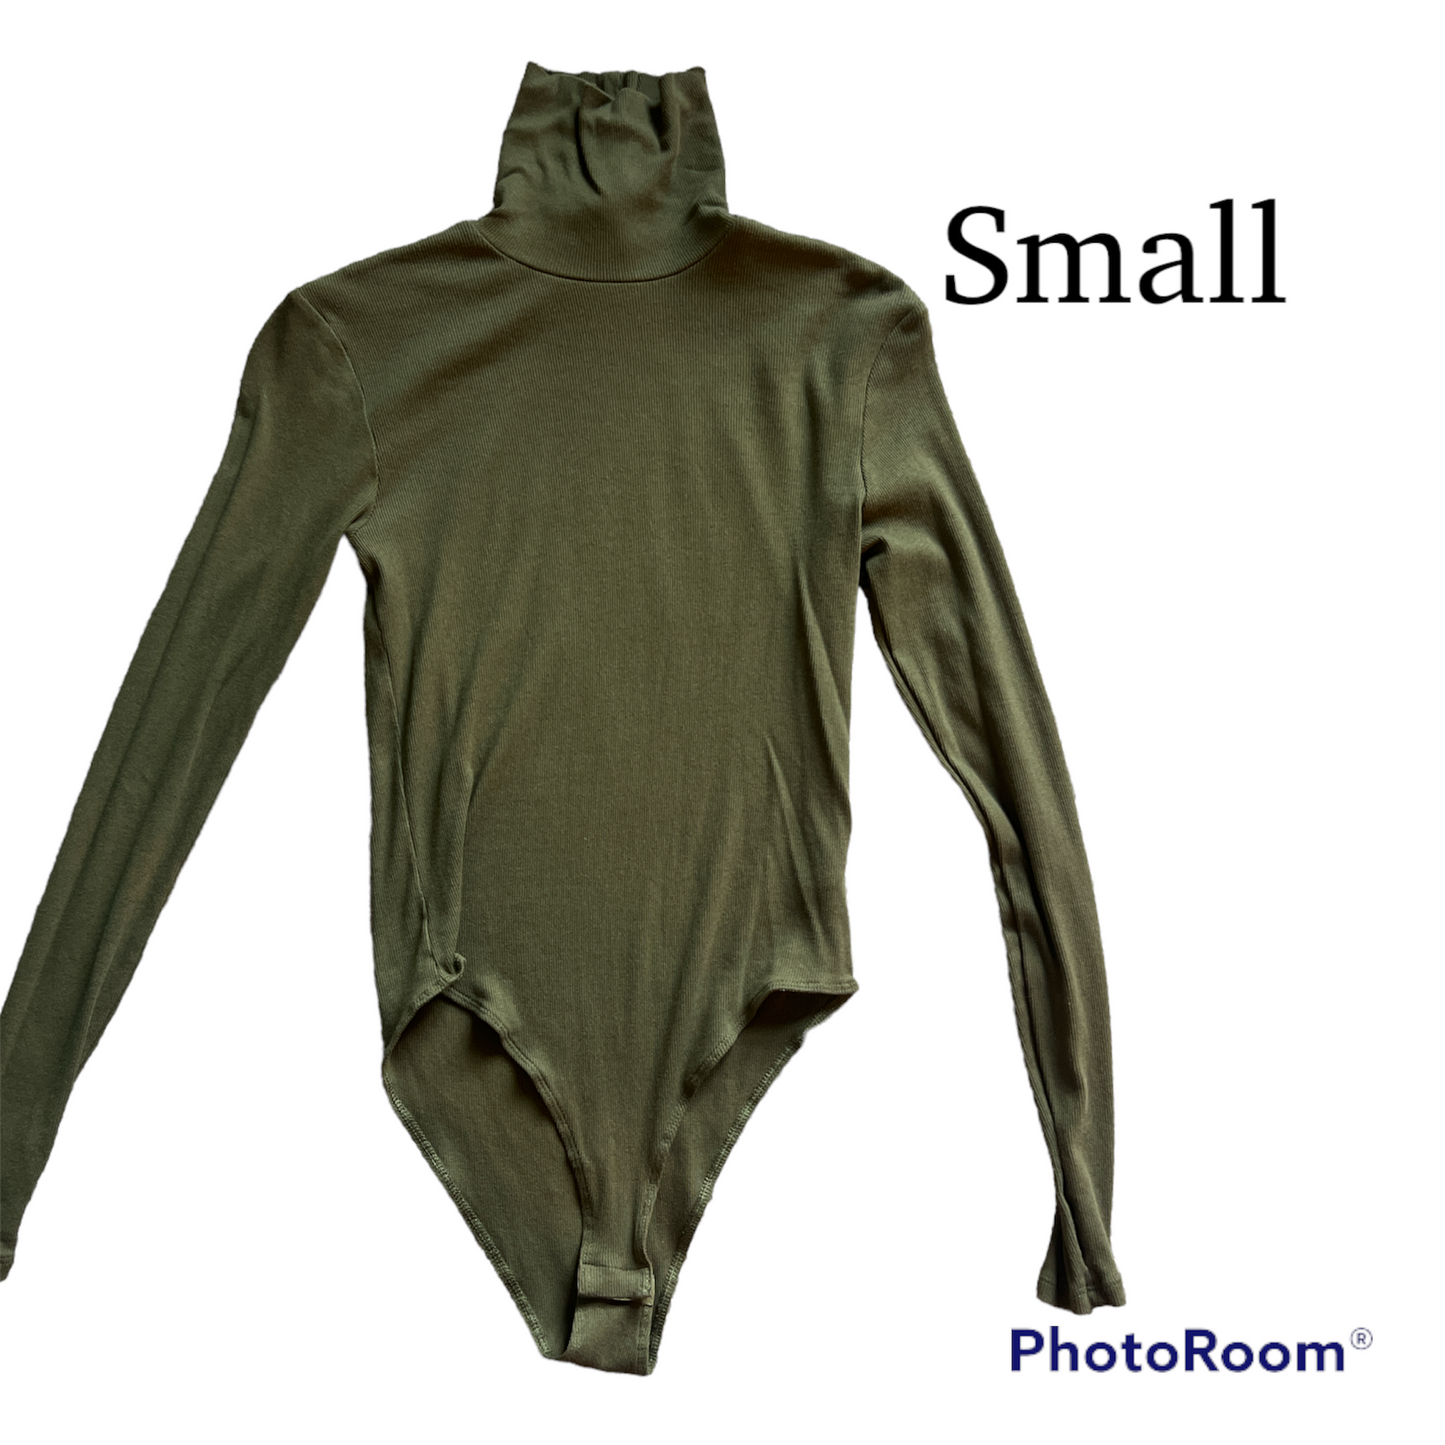 Green turtle neck body suit